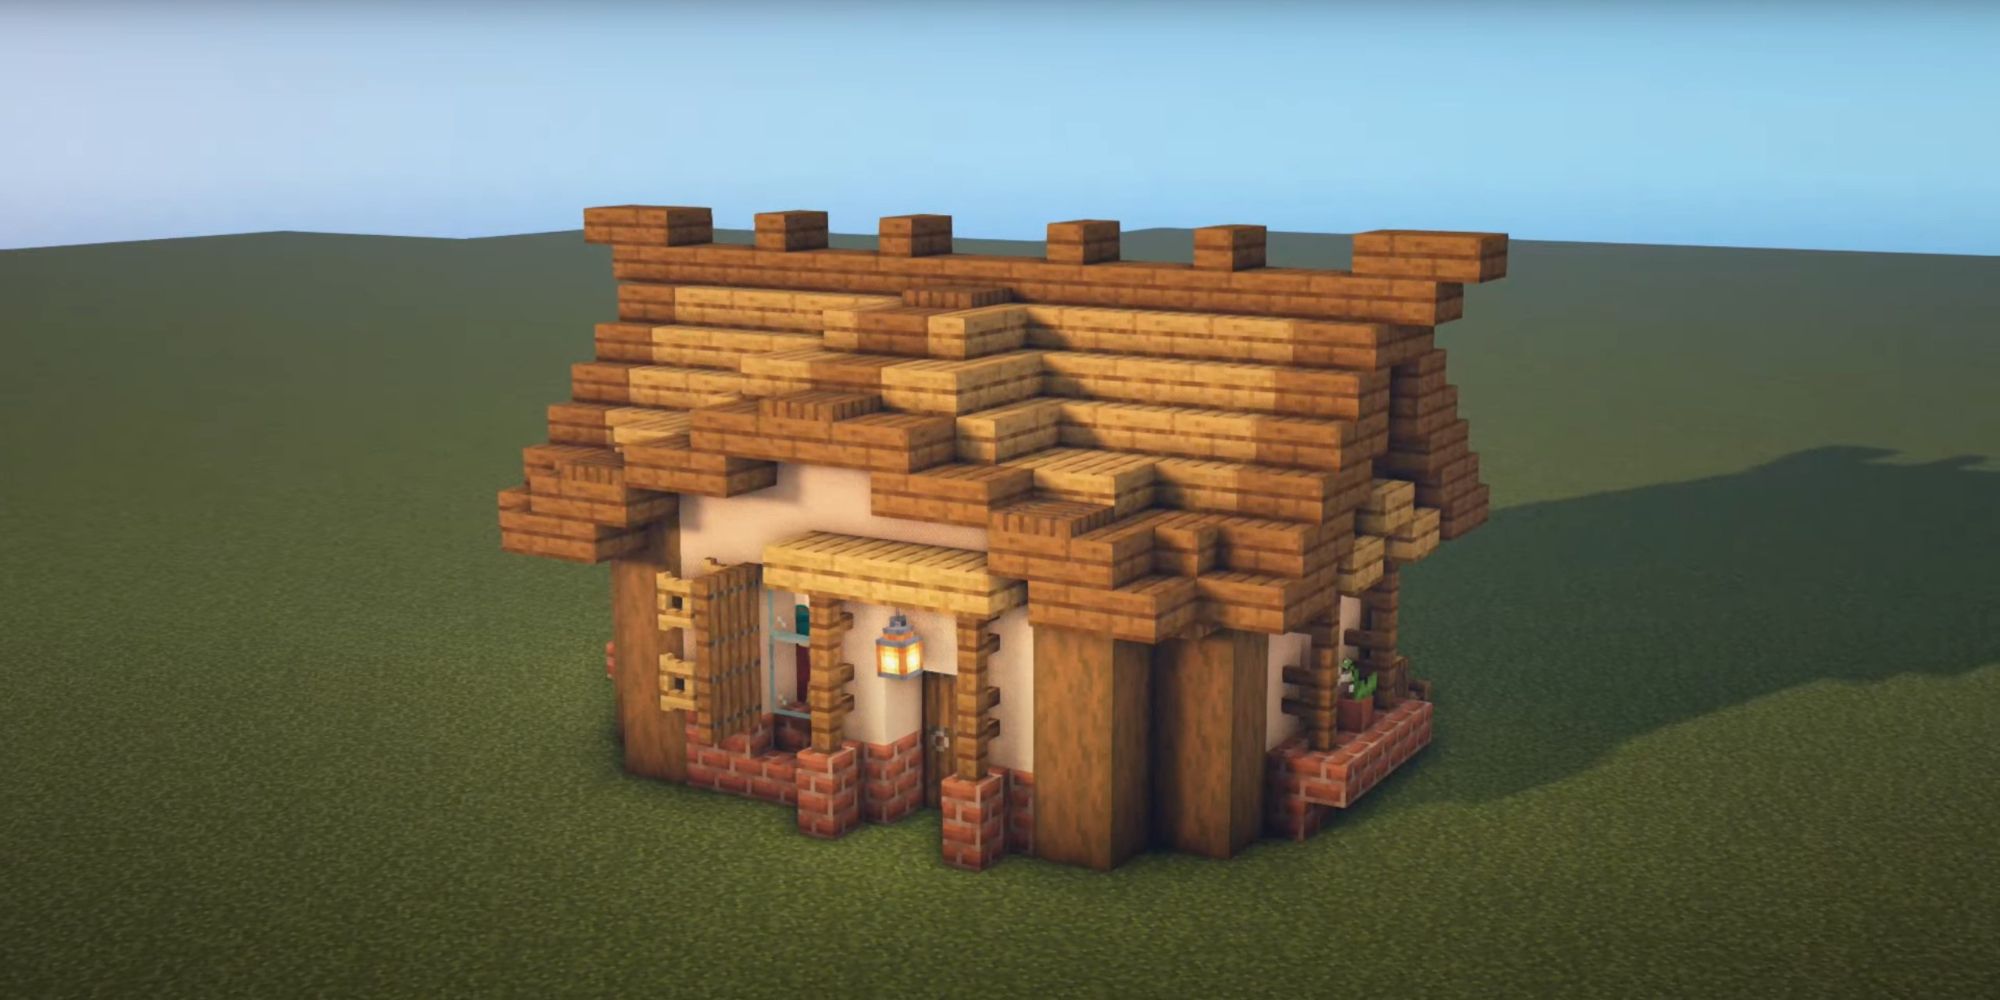 An image from Minecraft of an updated Villager House.